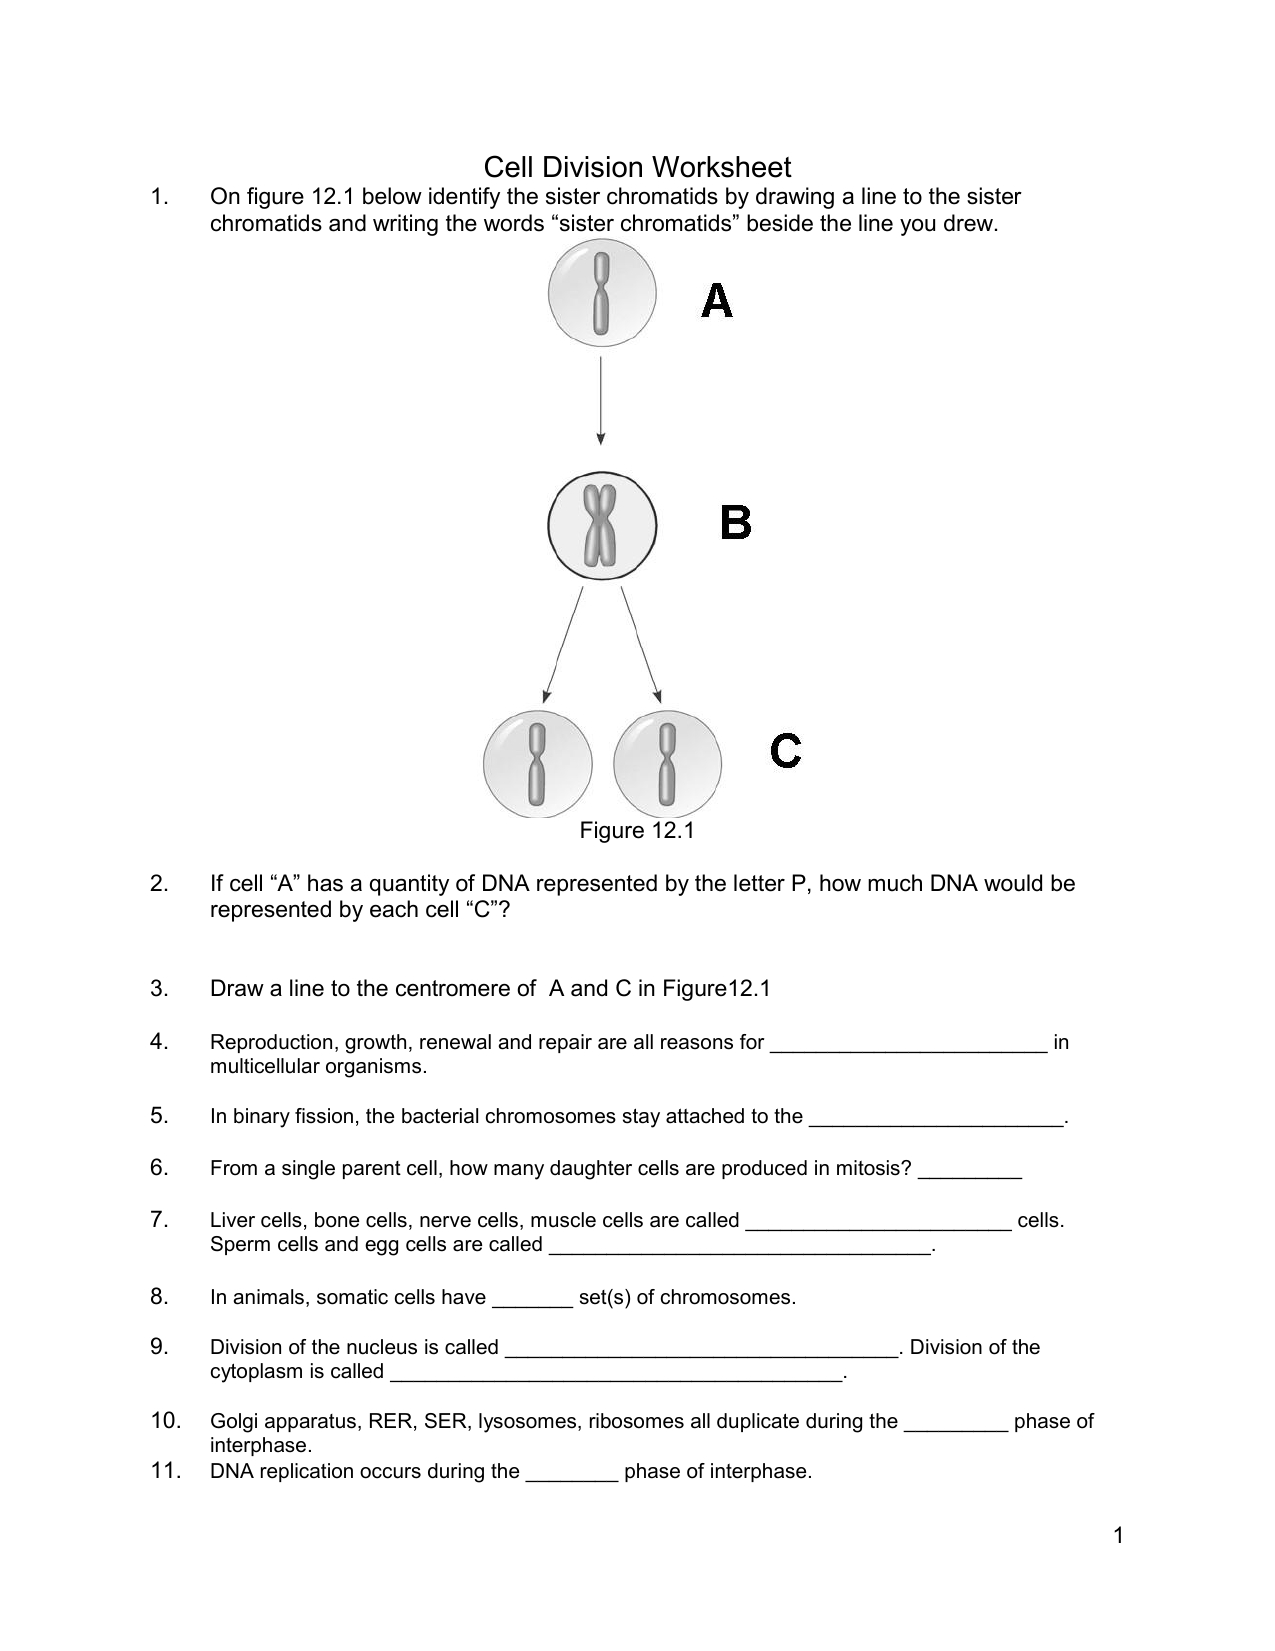 Cell Division Worksheet Pdf Within Cell Division Worksheet Answers